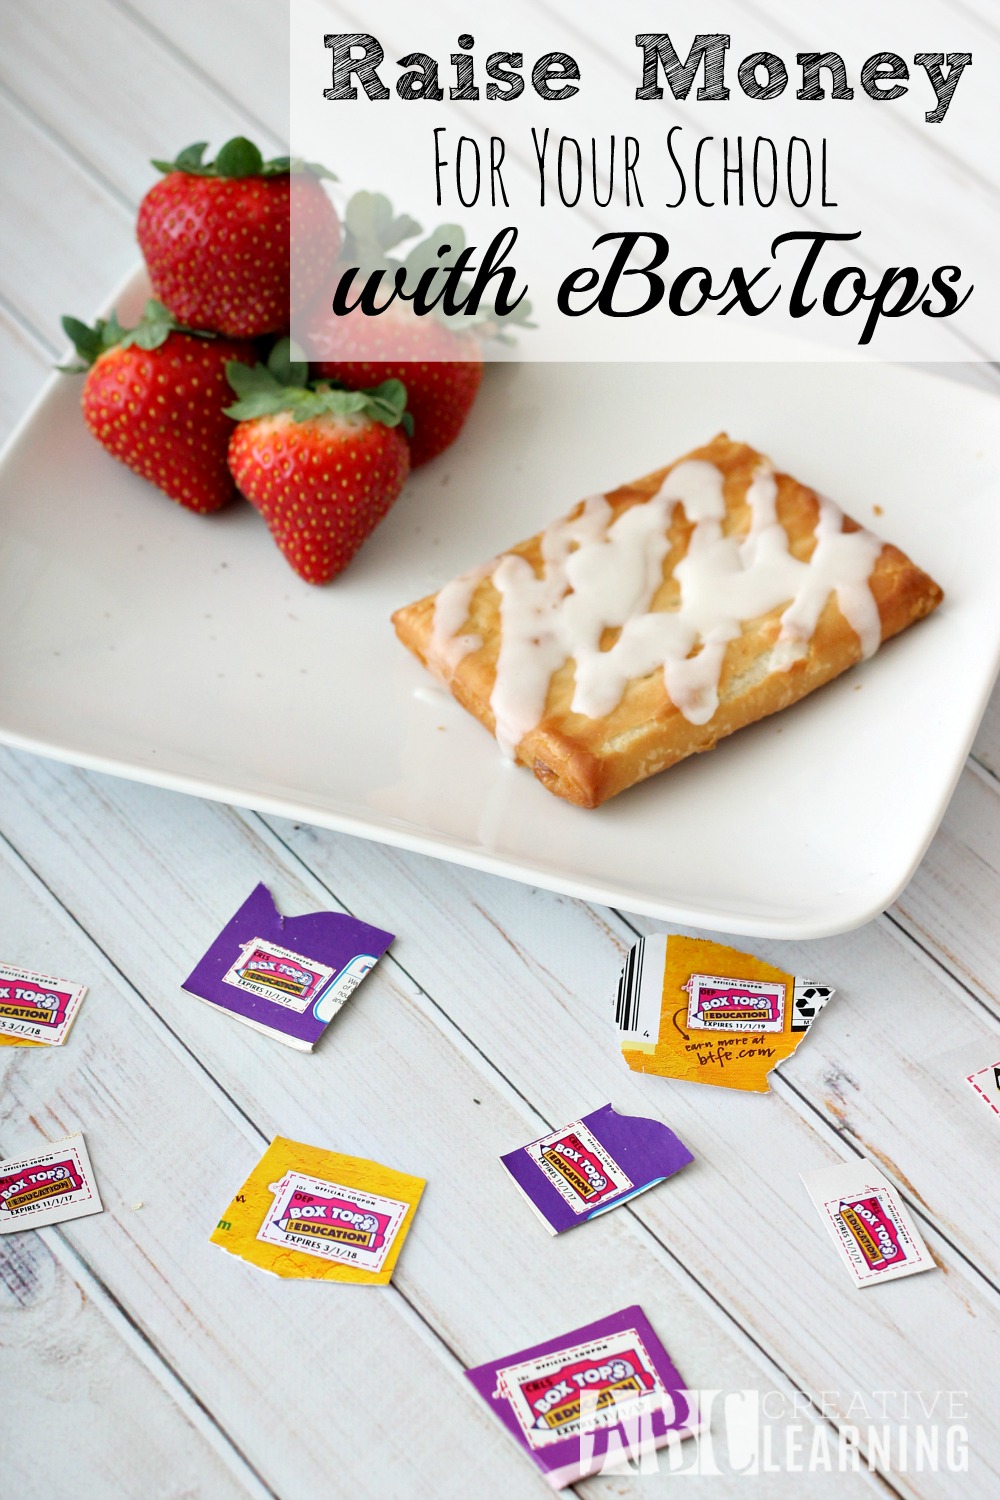 Raise Money For Your School with eBoxTops and Giveaway